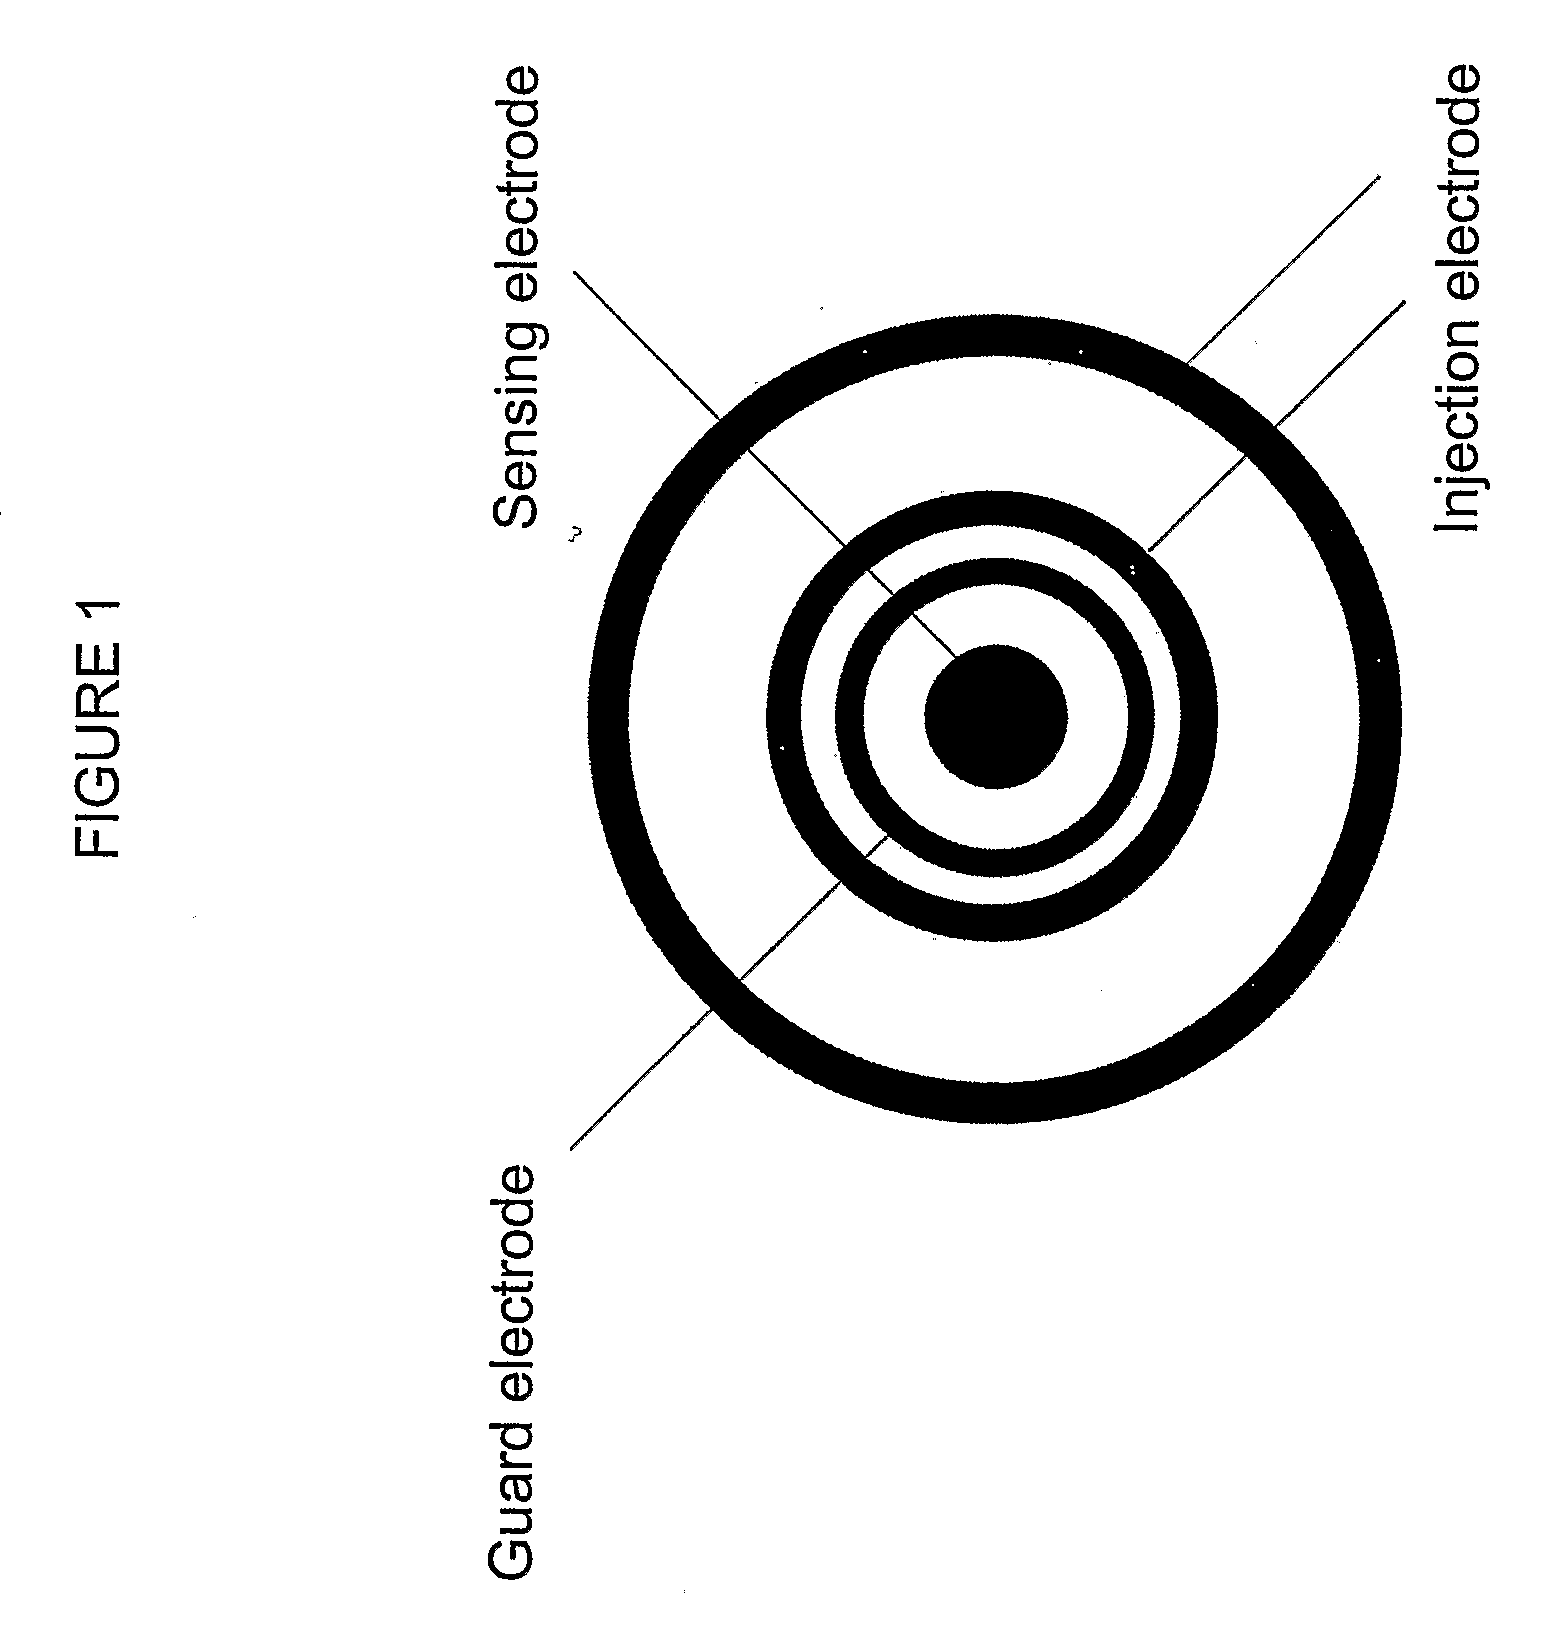 Method and apparatus for measuring glucose in body fluids using sub-dermal body tissue impedance measurements